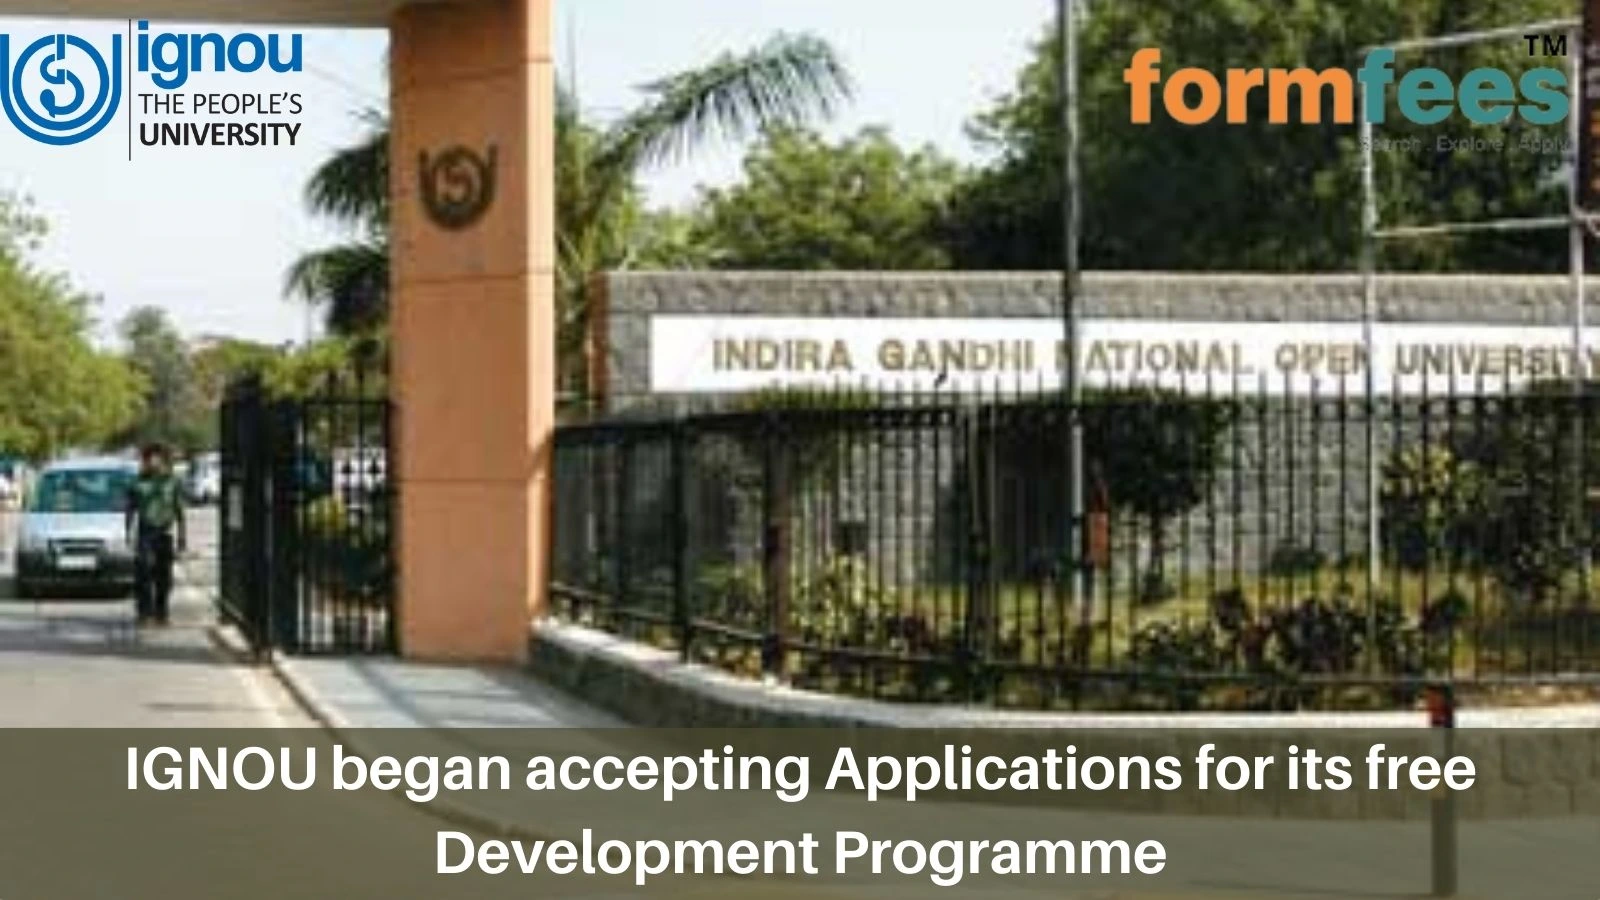 IGNOU began accepting Applications for its free Development Programme